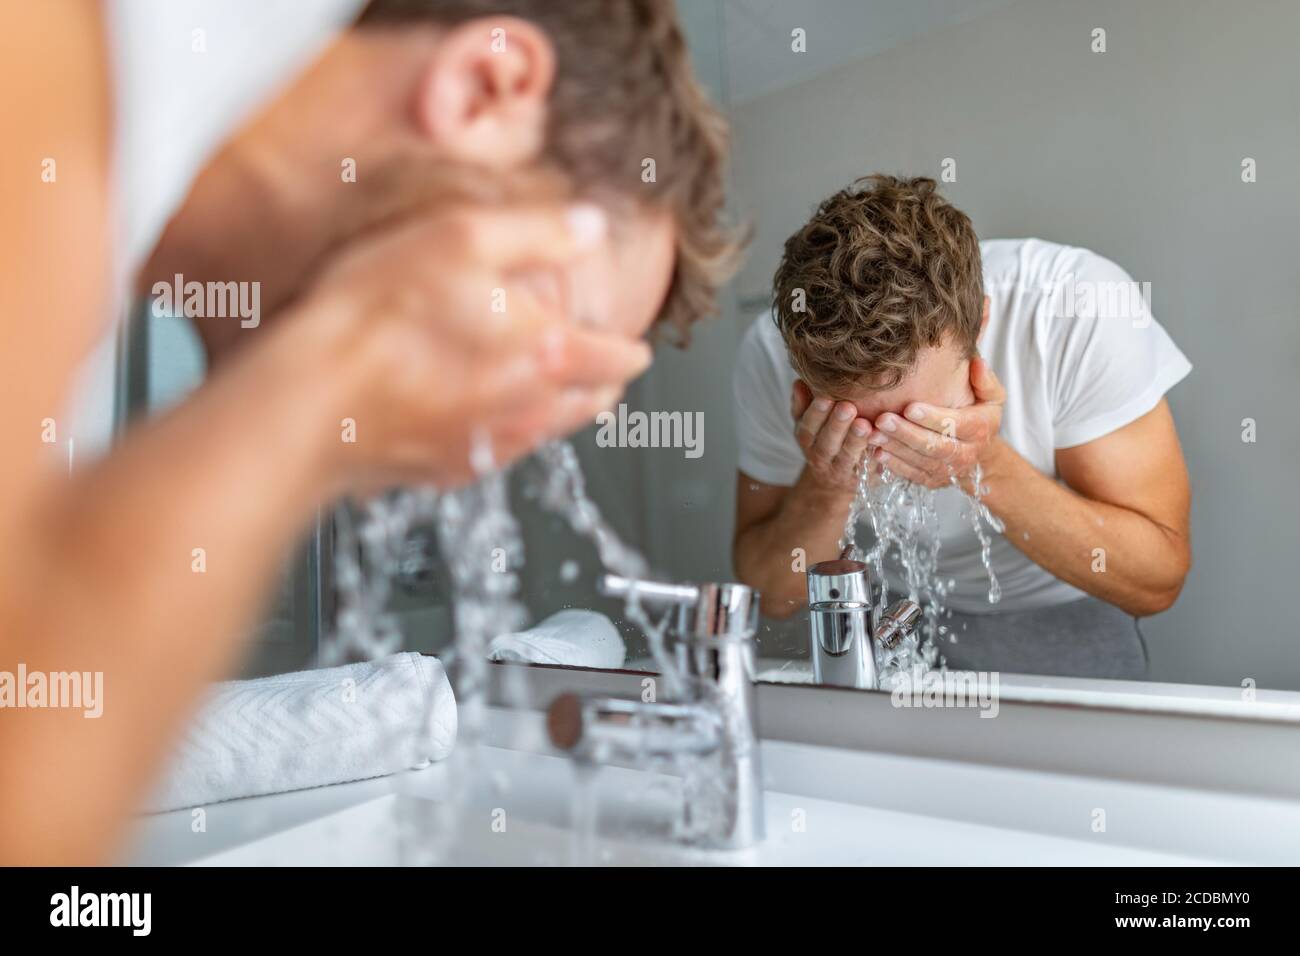 Face wash man splashing water cleaning washing face with facial soap in bathroom sink. Men taking care of skin, morning face wash routine for cleaning Stock Photo